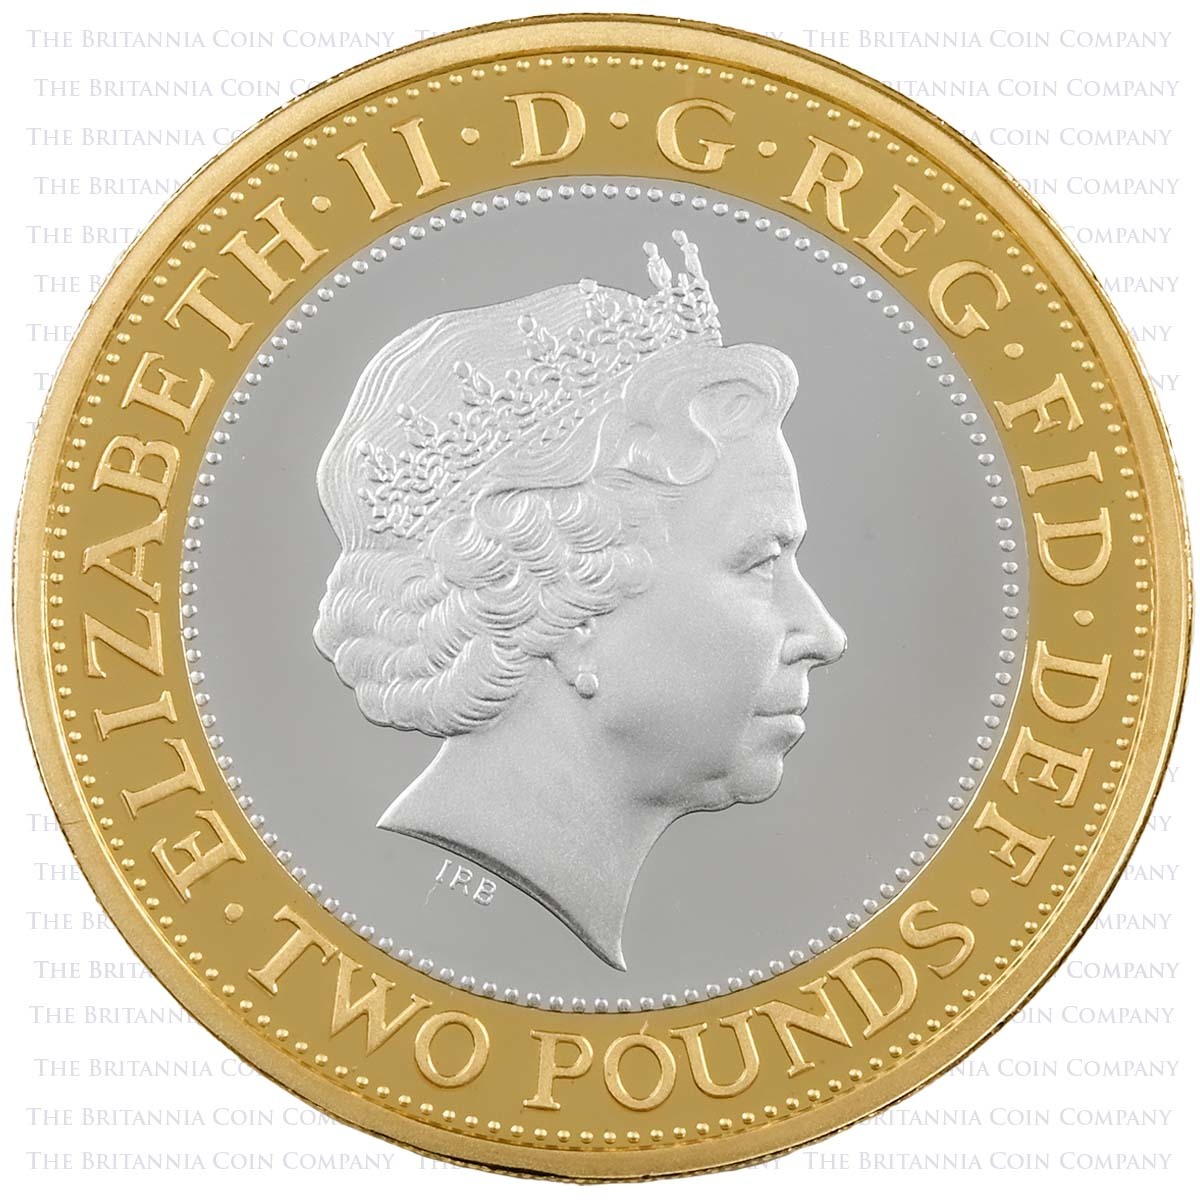 UK13GUSP 2013 Golden Guinea Two Pound Silver Proof Coin Obverse